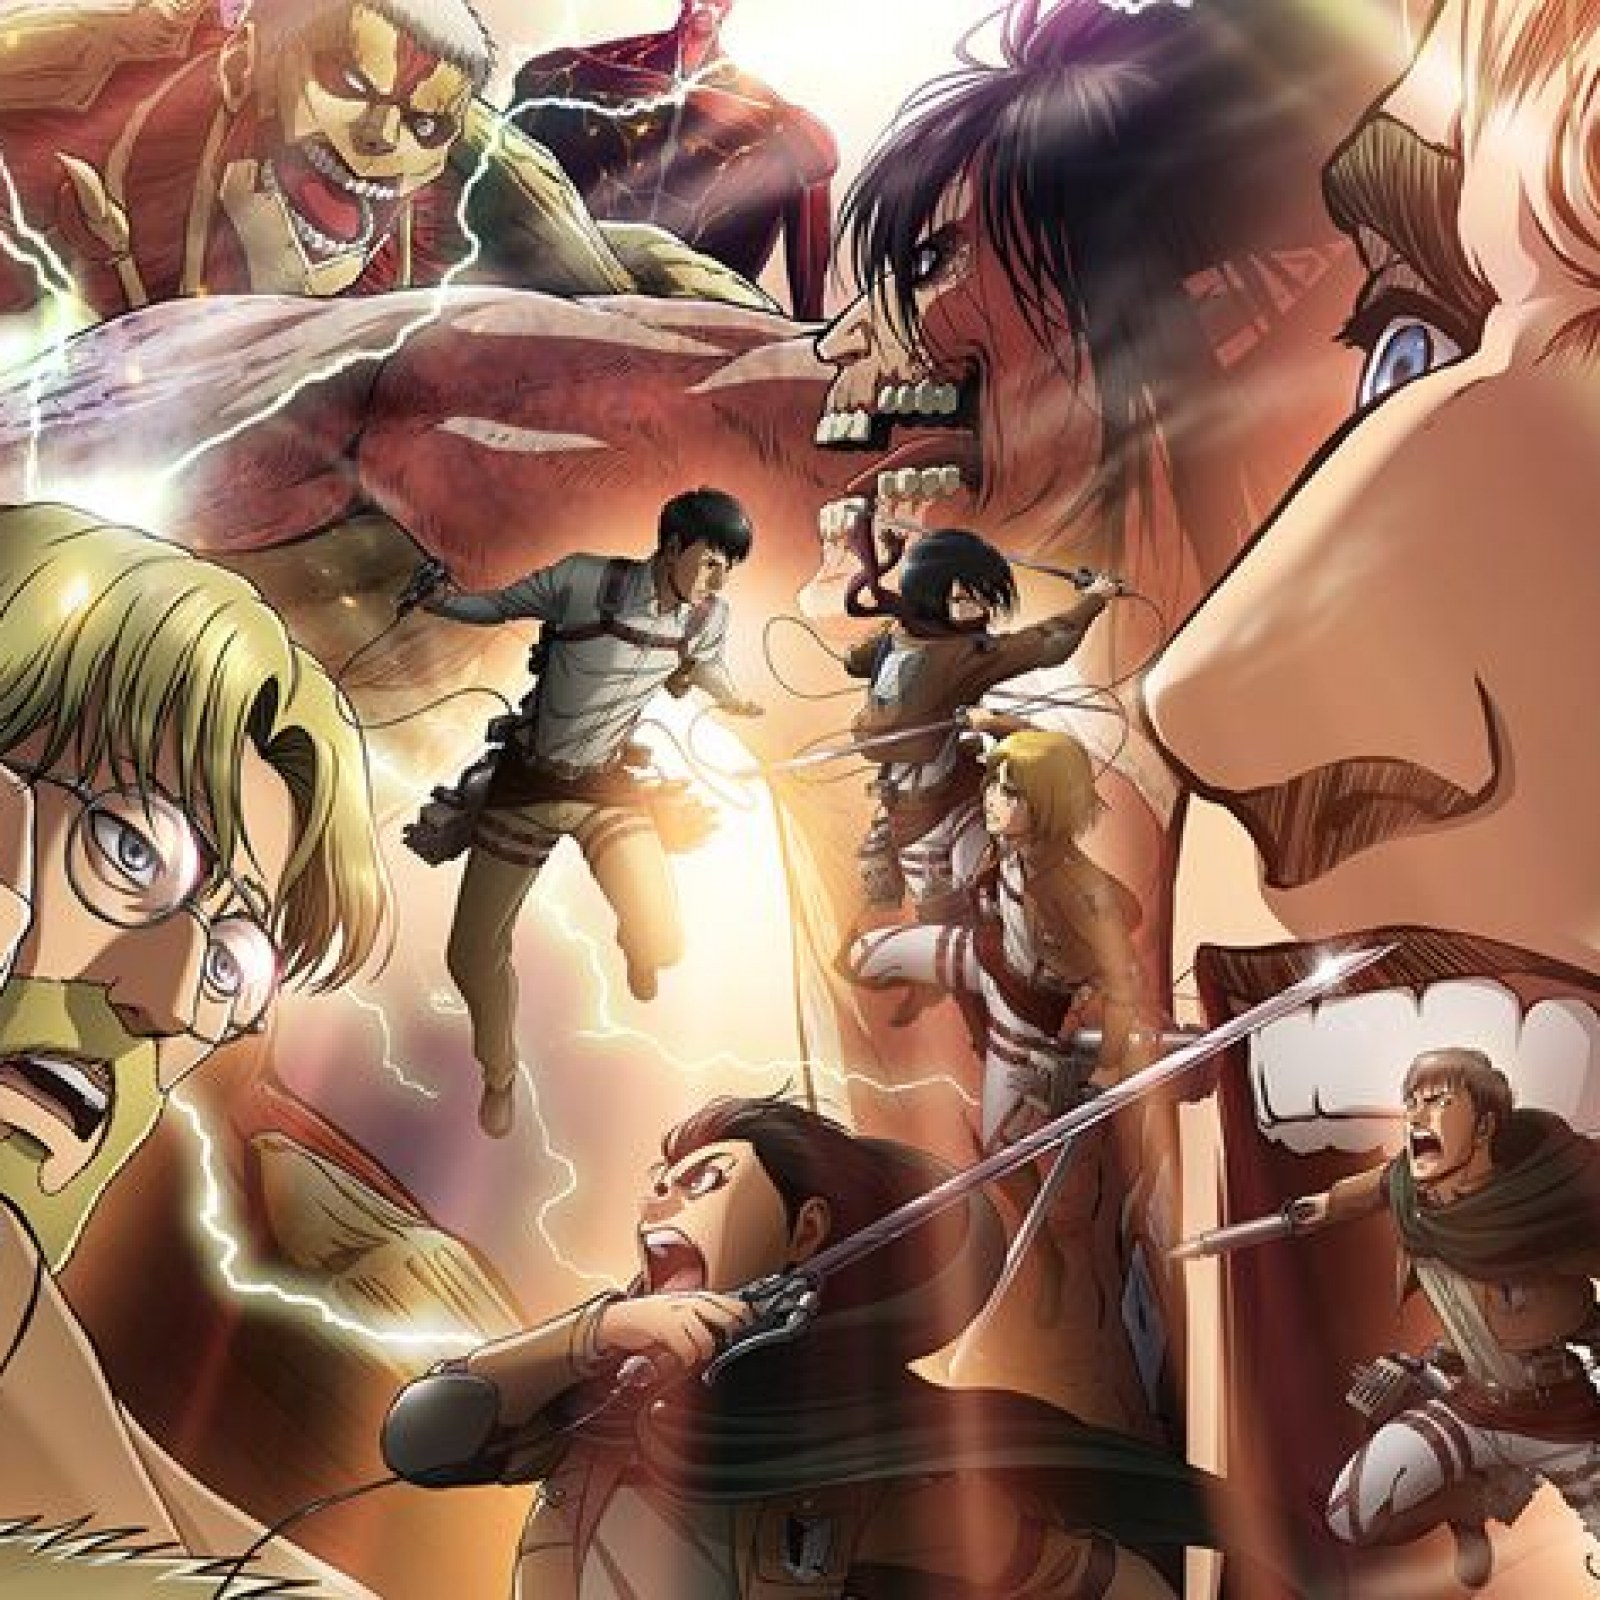 Attack On Titan Season 3 Part 2 When And How To Watch Anime S